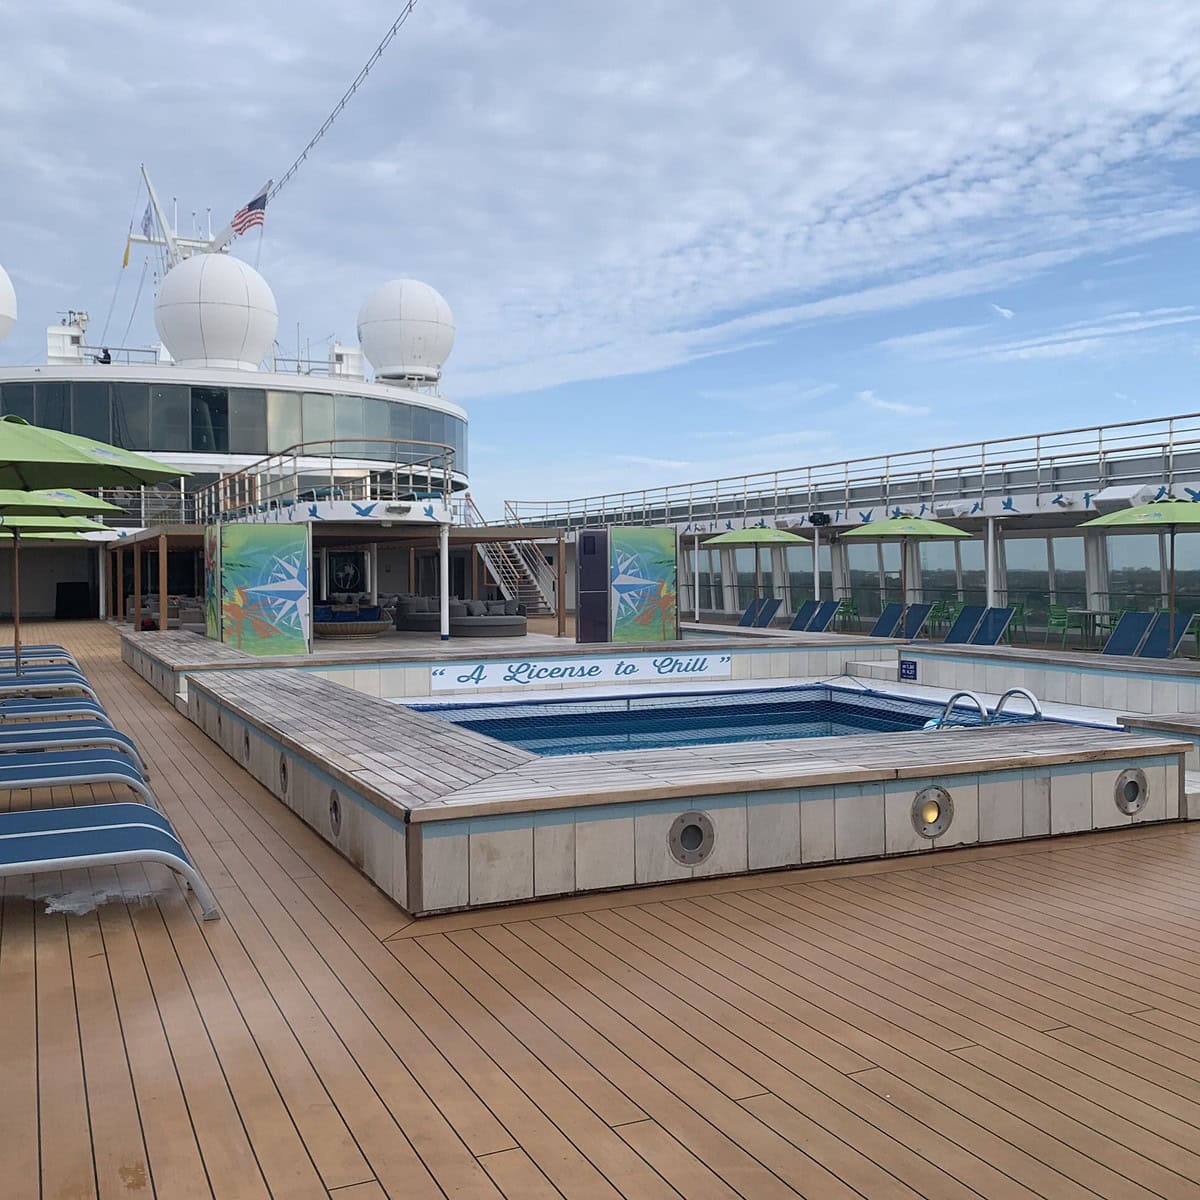 The pool deck at the Margaritaville At Sea cruise